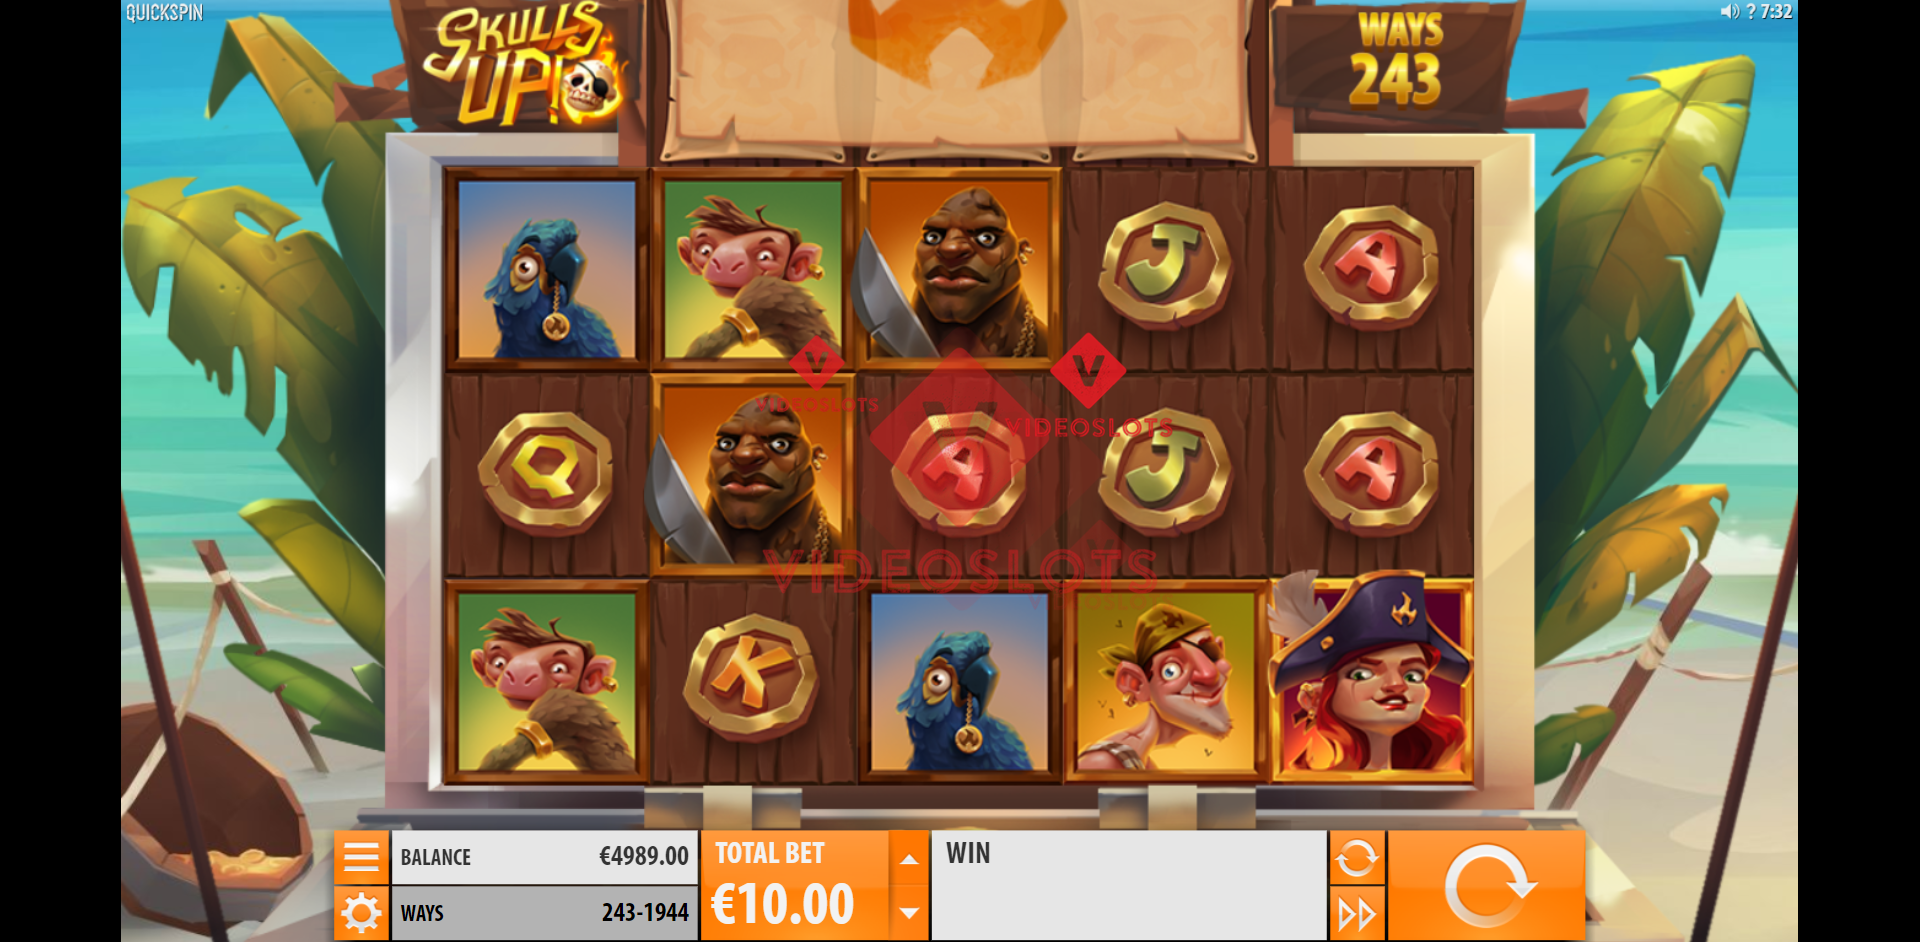 Base Game for Skulls Up slot from Quickspin